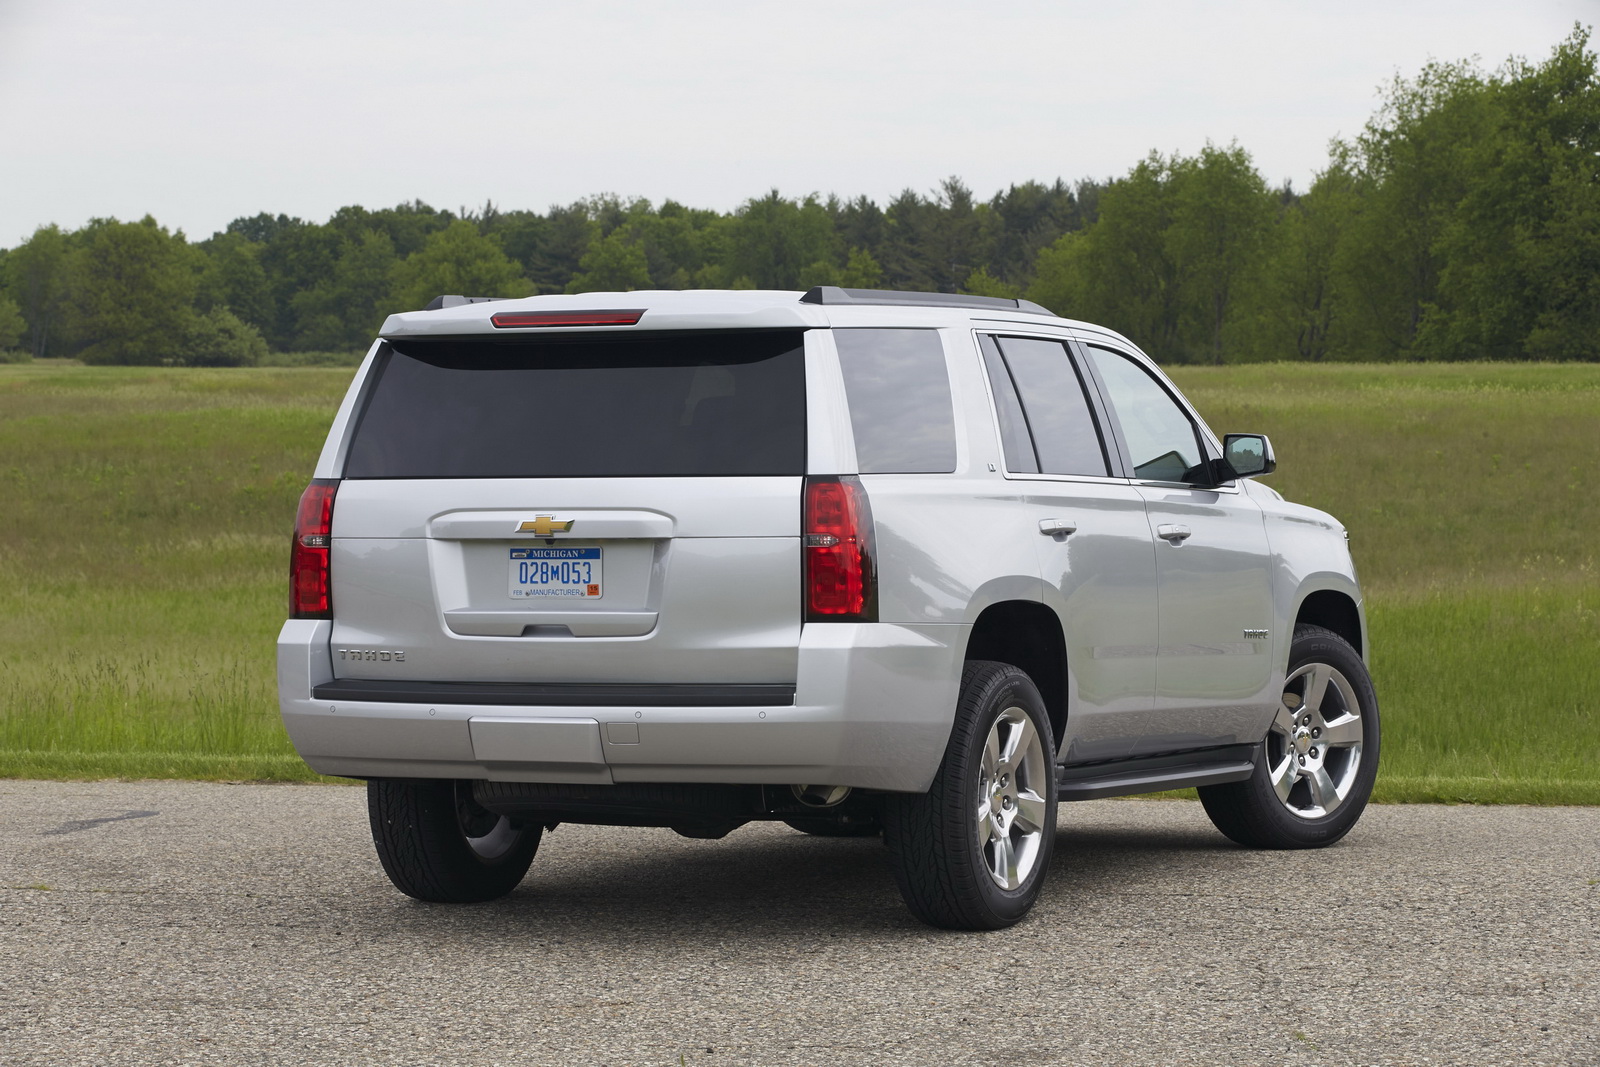 2015 Chevy Tahoe and Suburban Feature Extra 